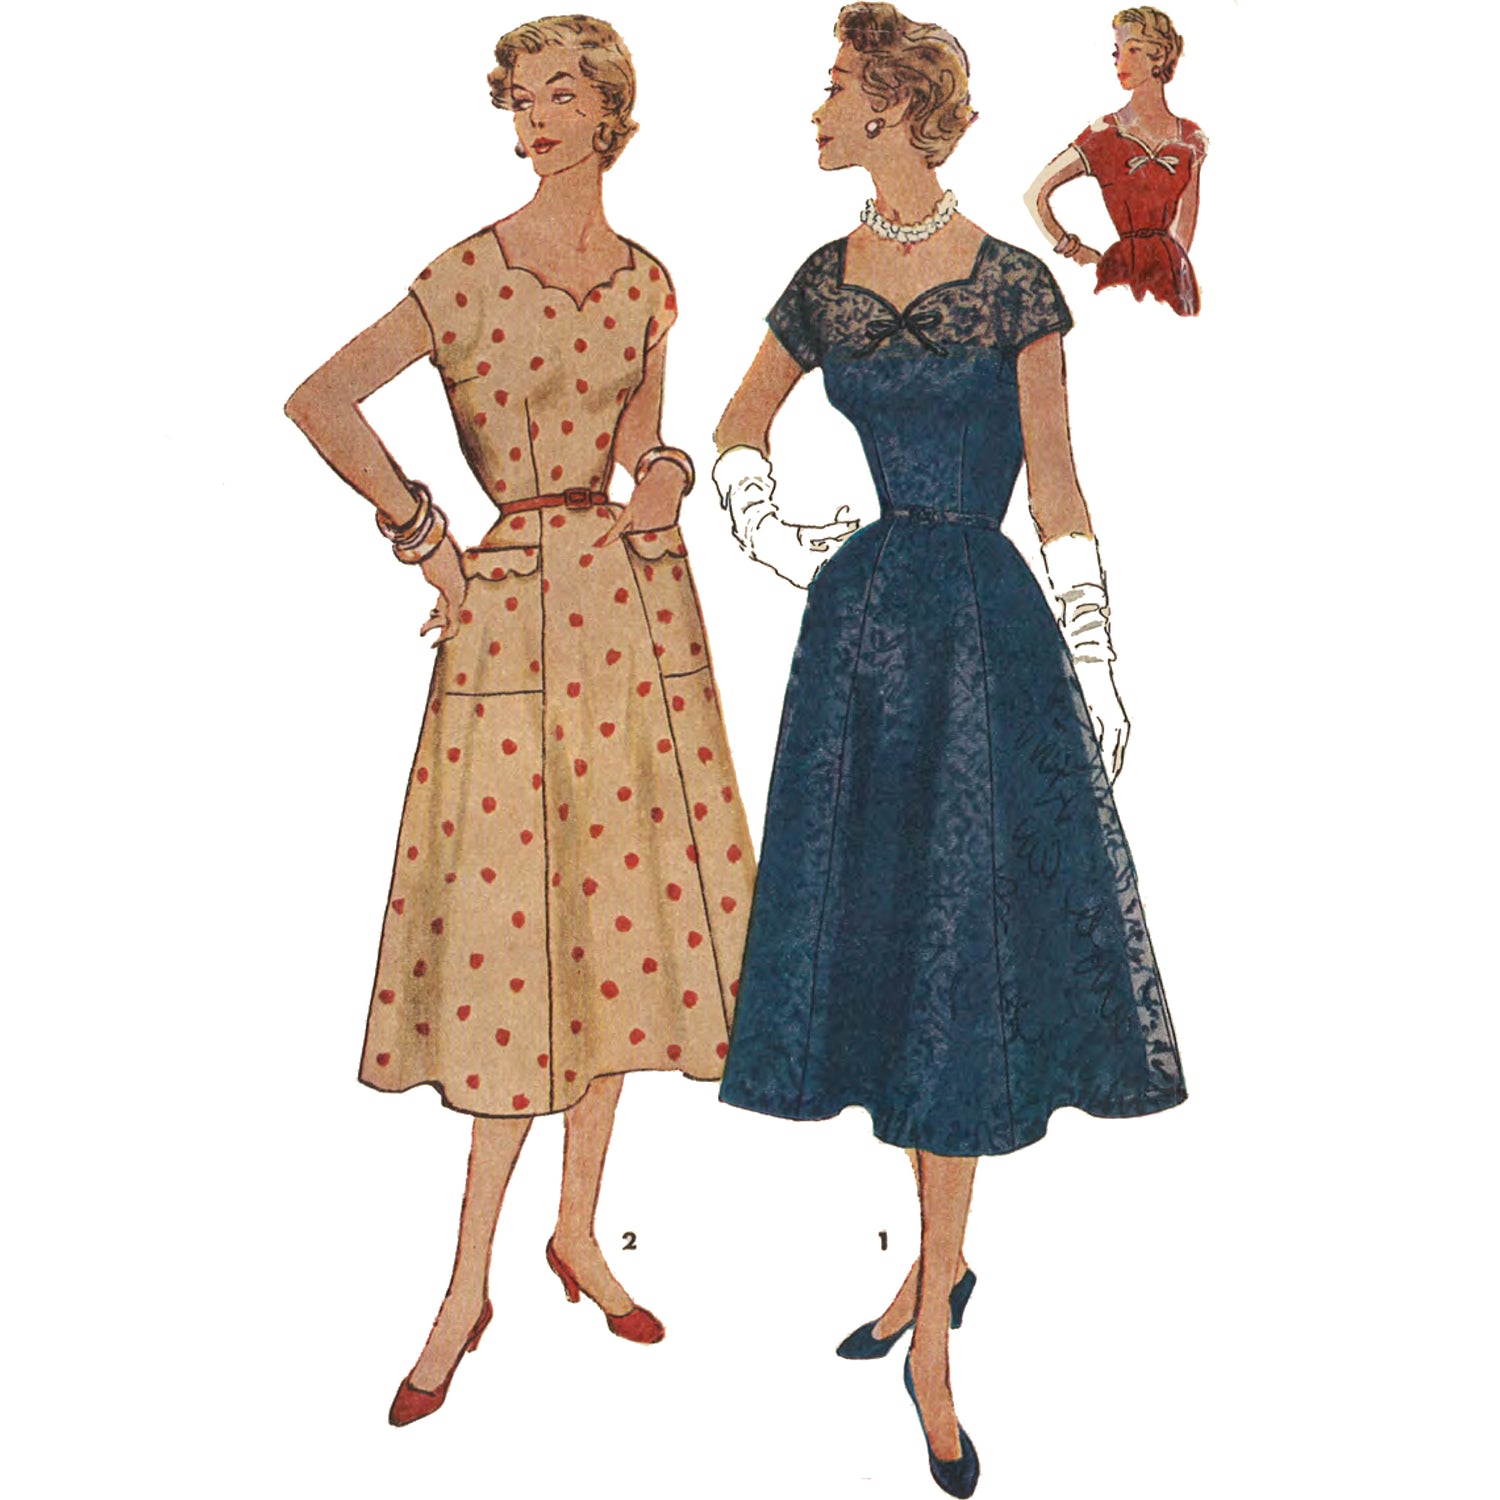 Women wearing dresses. Left, view 2, beige with red dots. Right, view 1, navy blue.